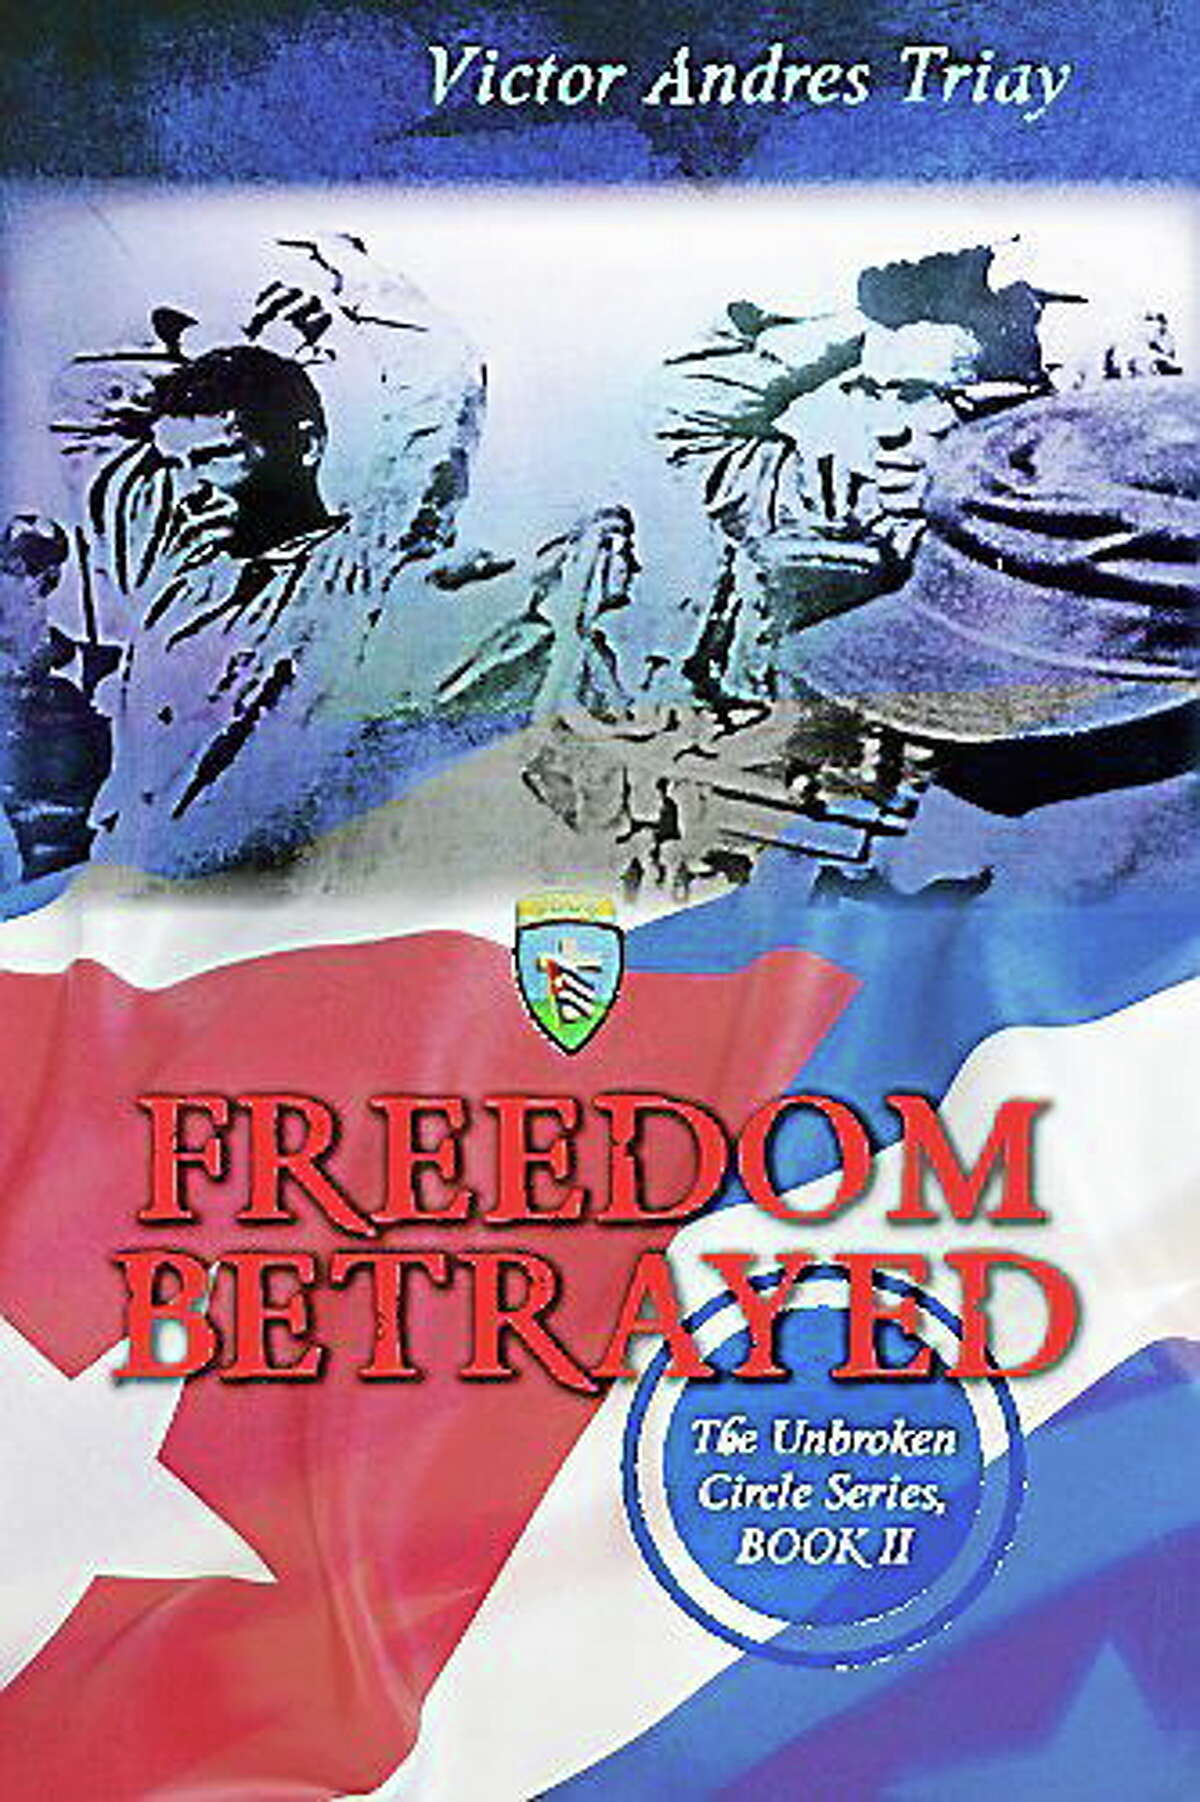 “Freedom Betrayed,” the second book in the Unbroken Circle series by Victor Triay, is available on Amazon.